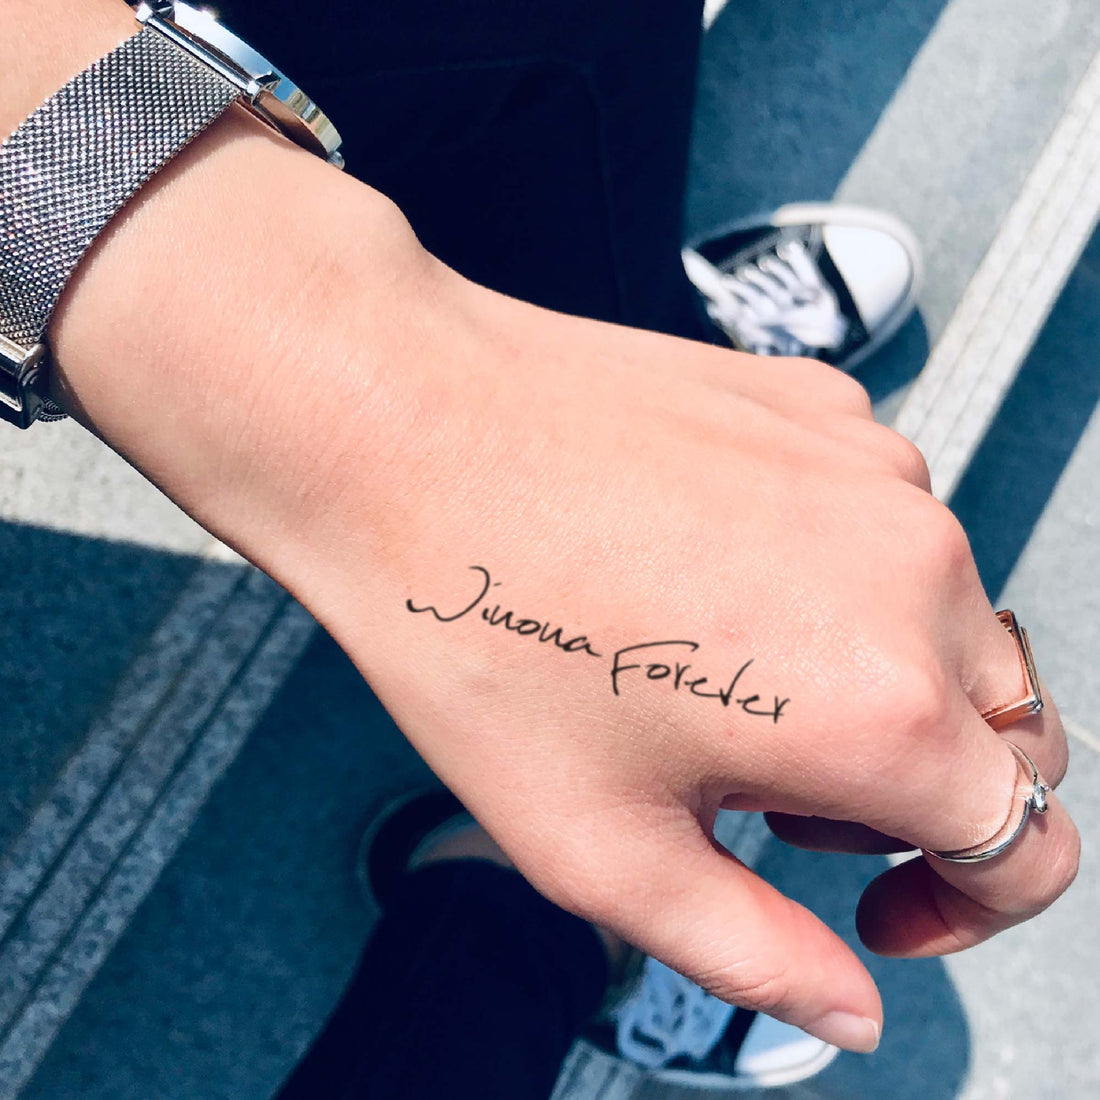 Winona Forever custom temporary tattoo sticker design idea inspiration meanings removal arm wrist hand words font name signature calligraphy lyrics tour concert outfits merch accessory gift souvenir costumes wear dress up code